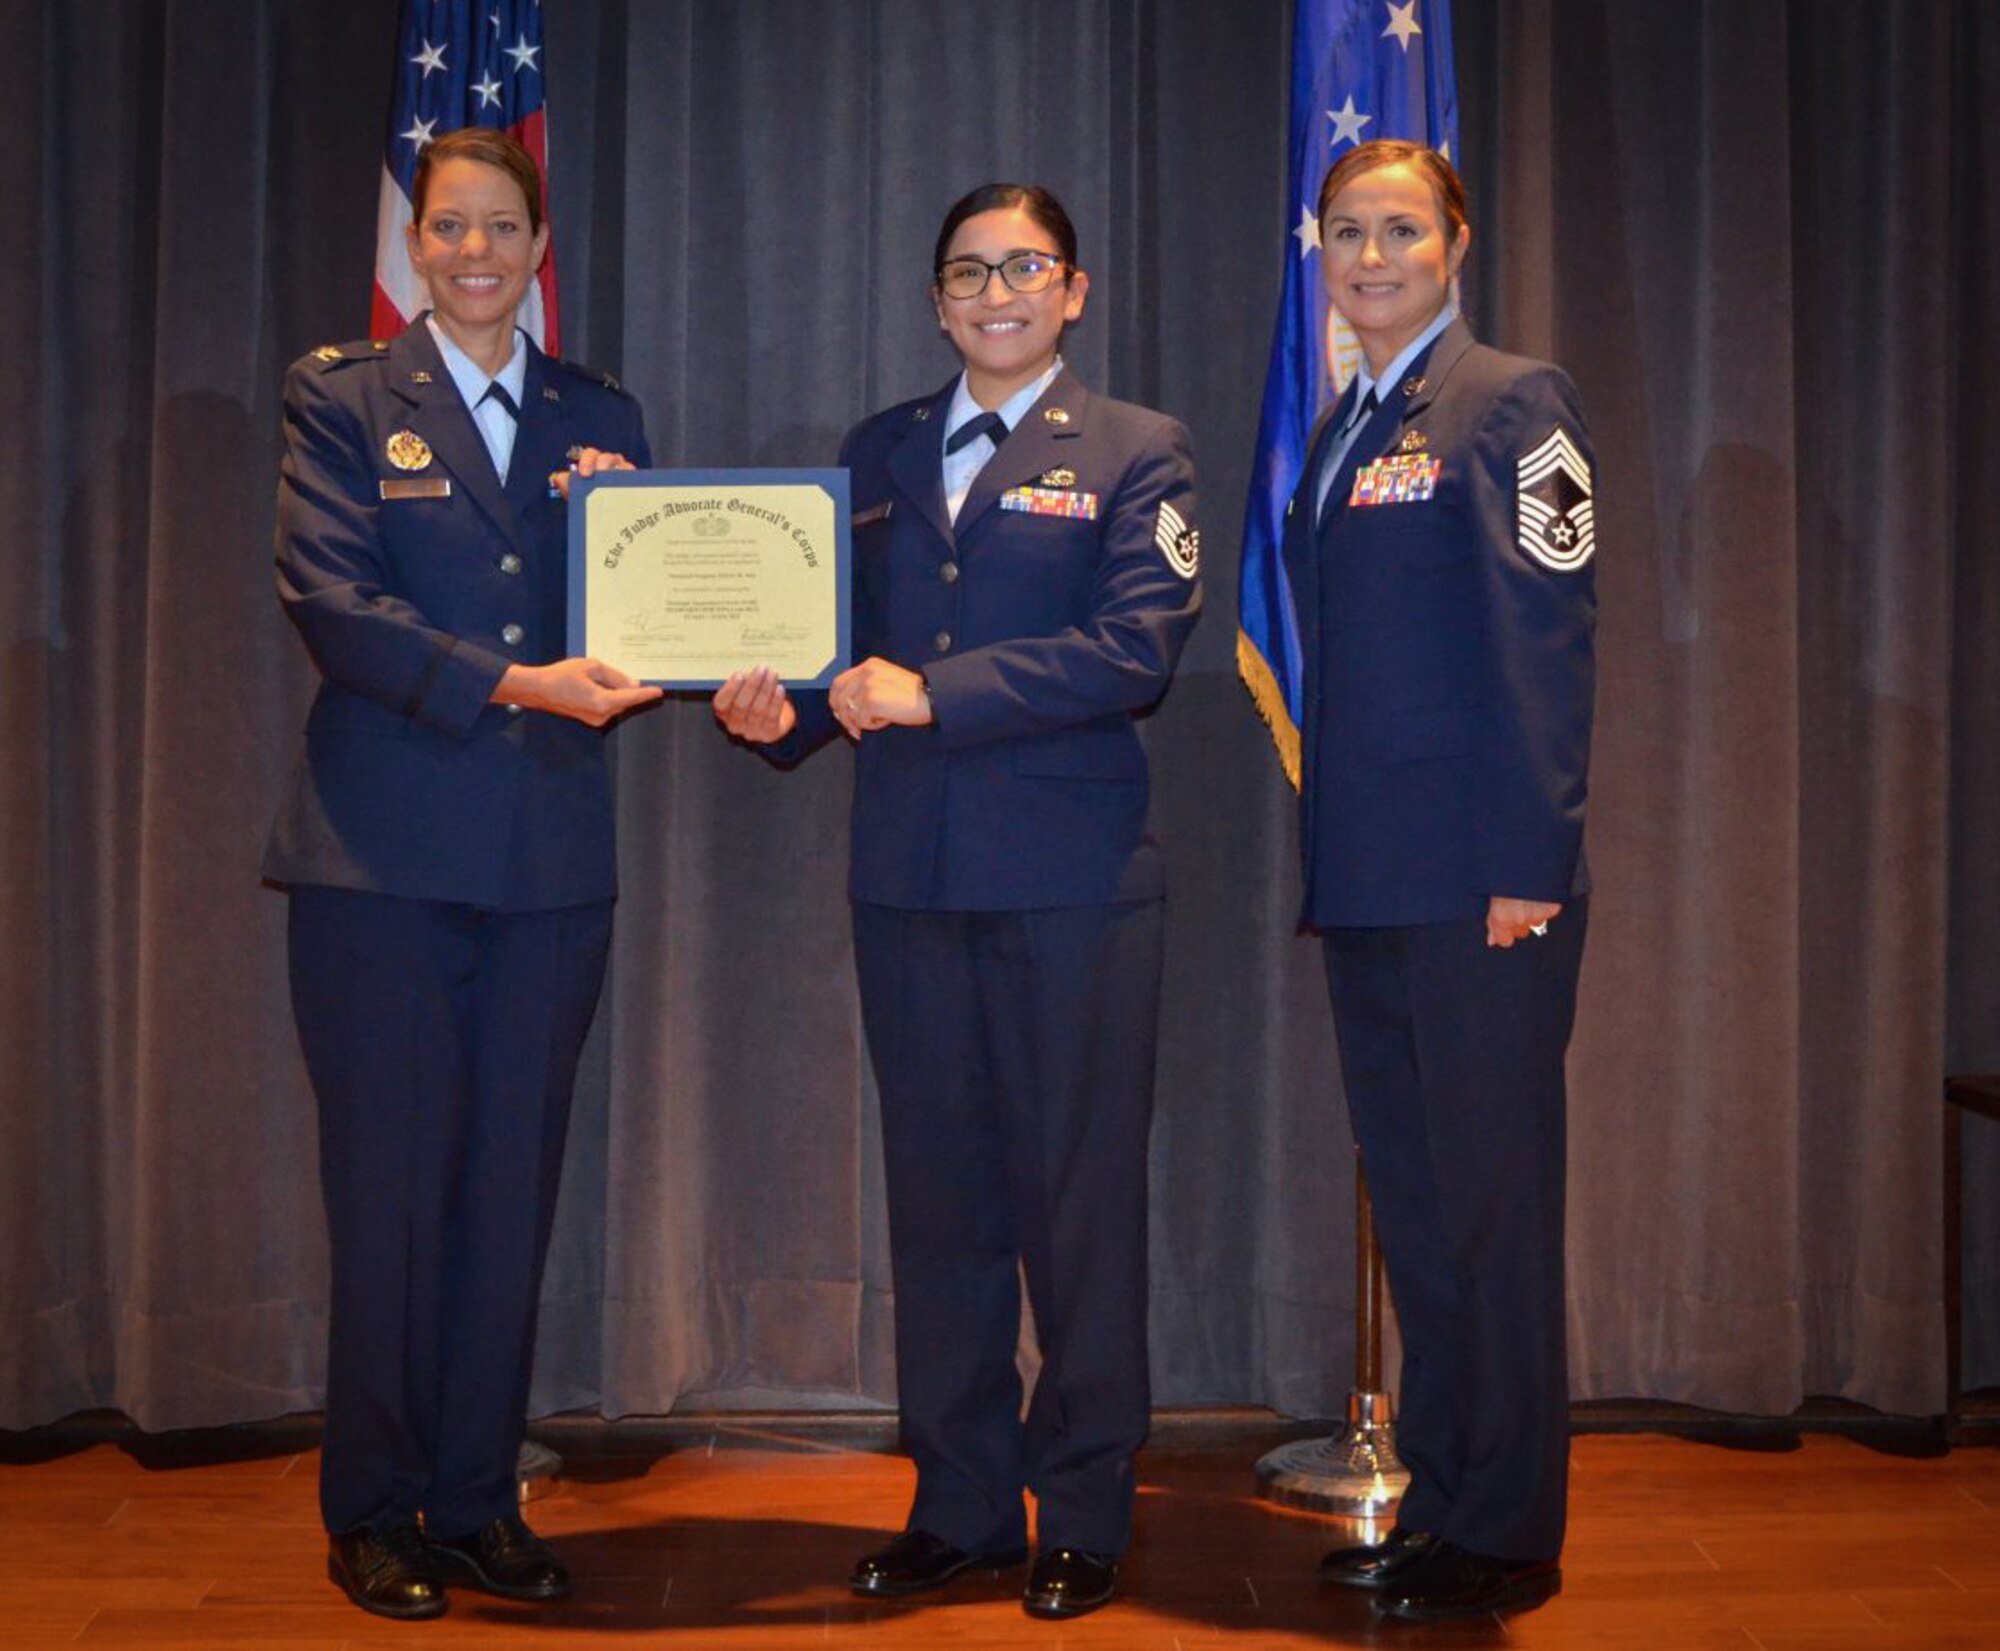 (center) 301st Fighter Wing's Tech. Sgt. Felicia Ash receives her Paralegal Apprentice Course (PAC) certification during a graduation ceremony at The Judge Advocate General’s School, Maxwell Air Force Base, Ala., July 2021. Ash was recognized as the course's distinguished graduate for her superior performance. (courtesy photo)